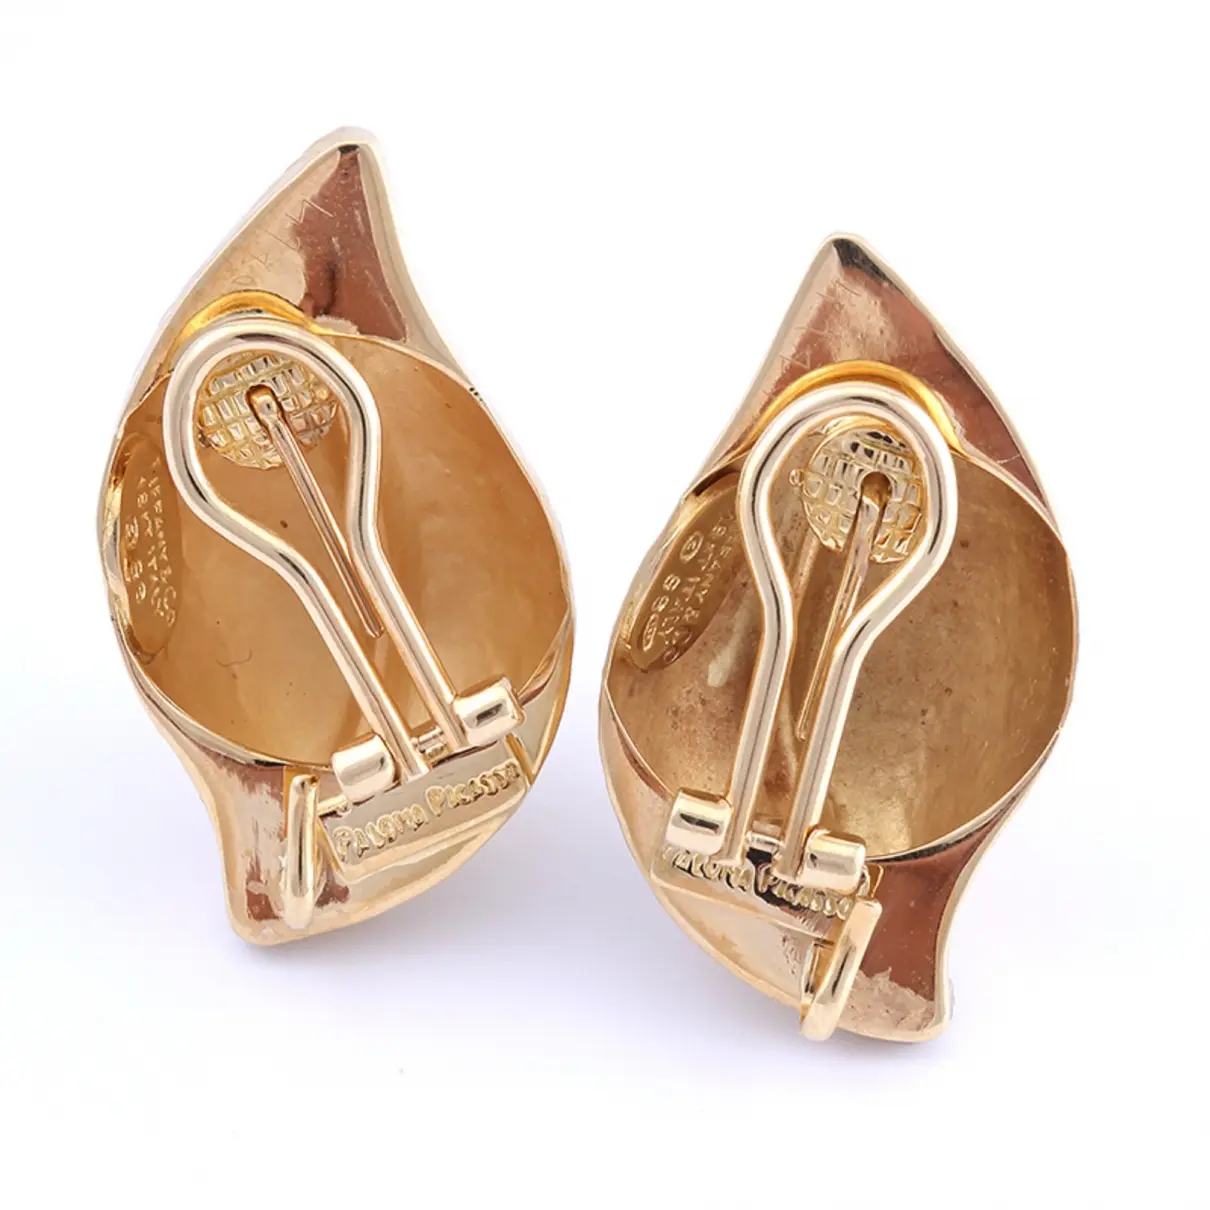 Buy Tiffany & Co Paloma Picasso yellow gold earrings online